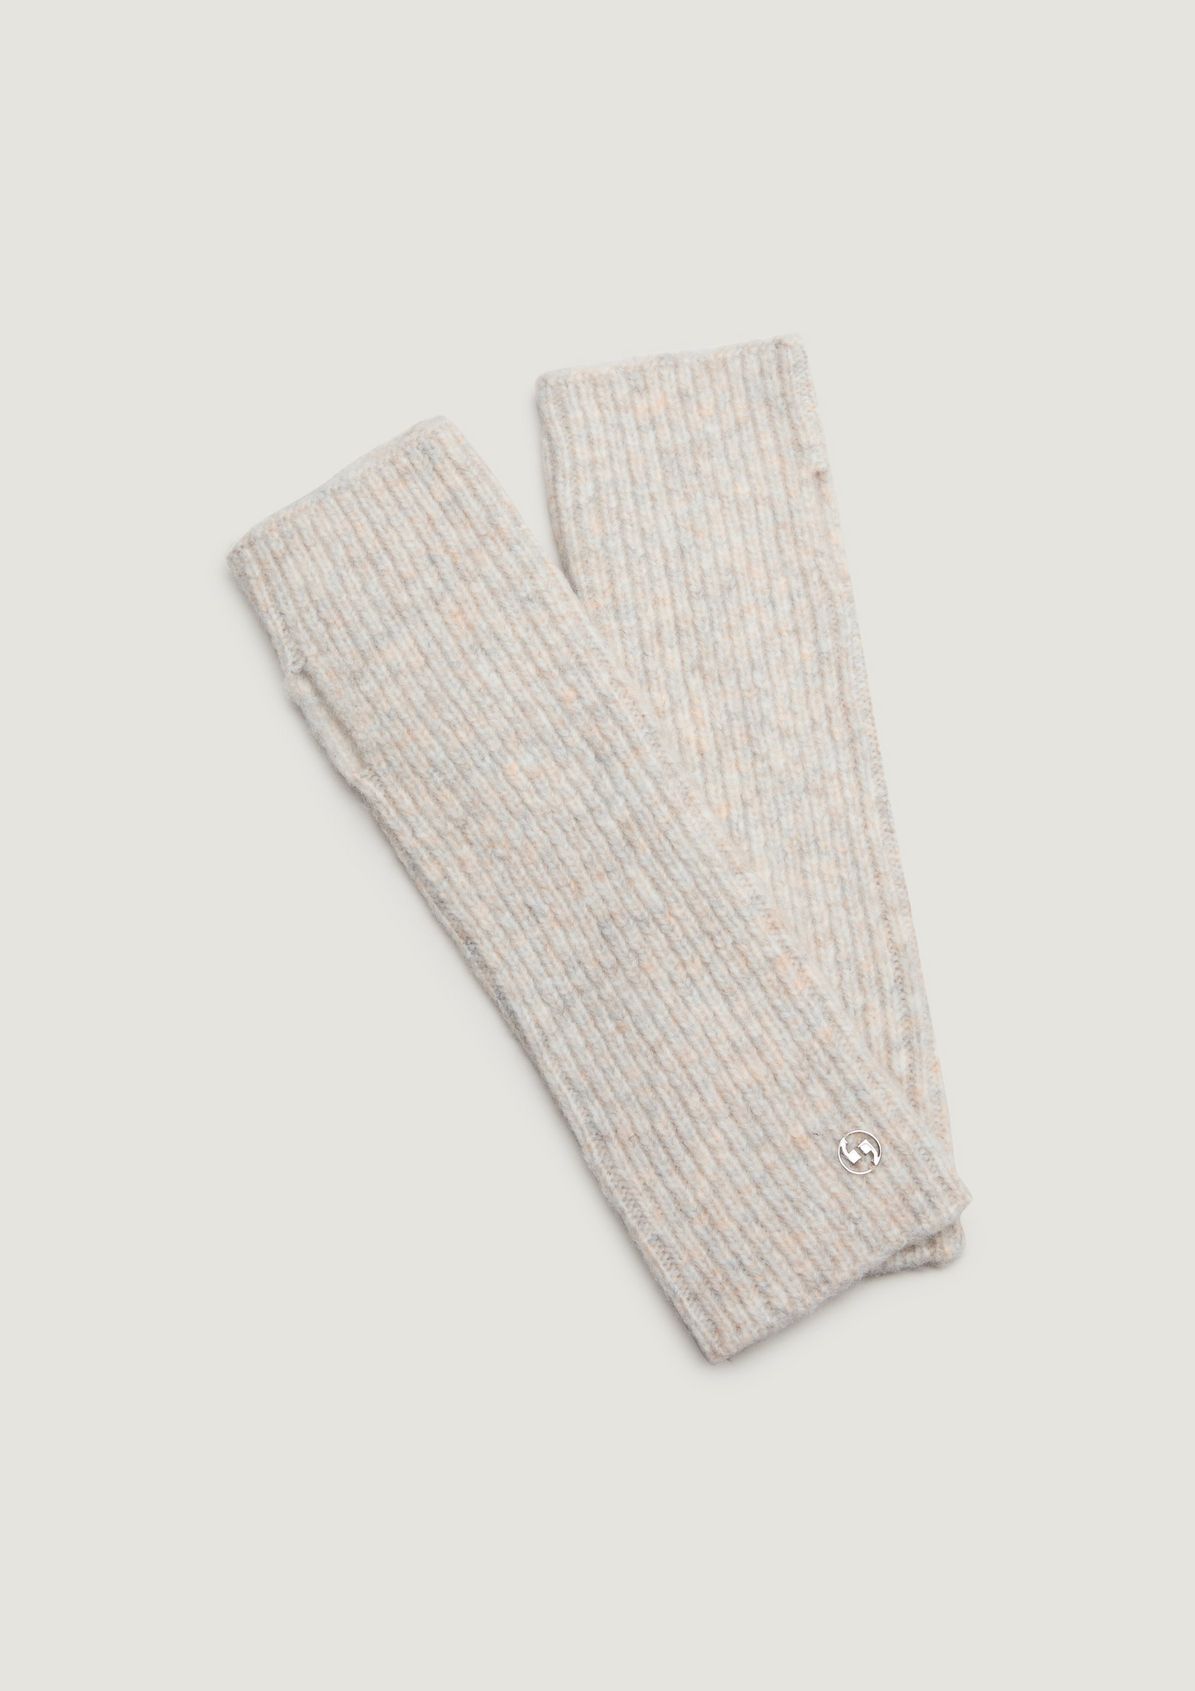 Wrist warmers with wool from comma